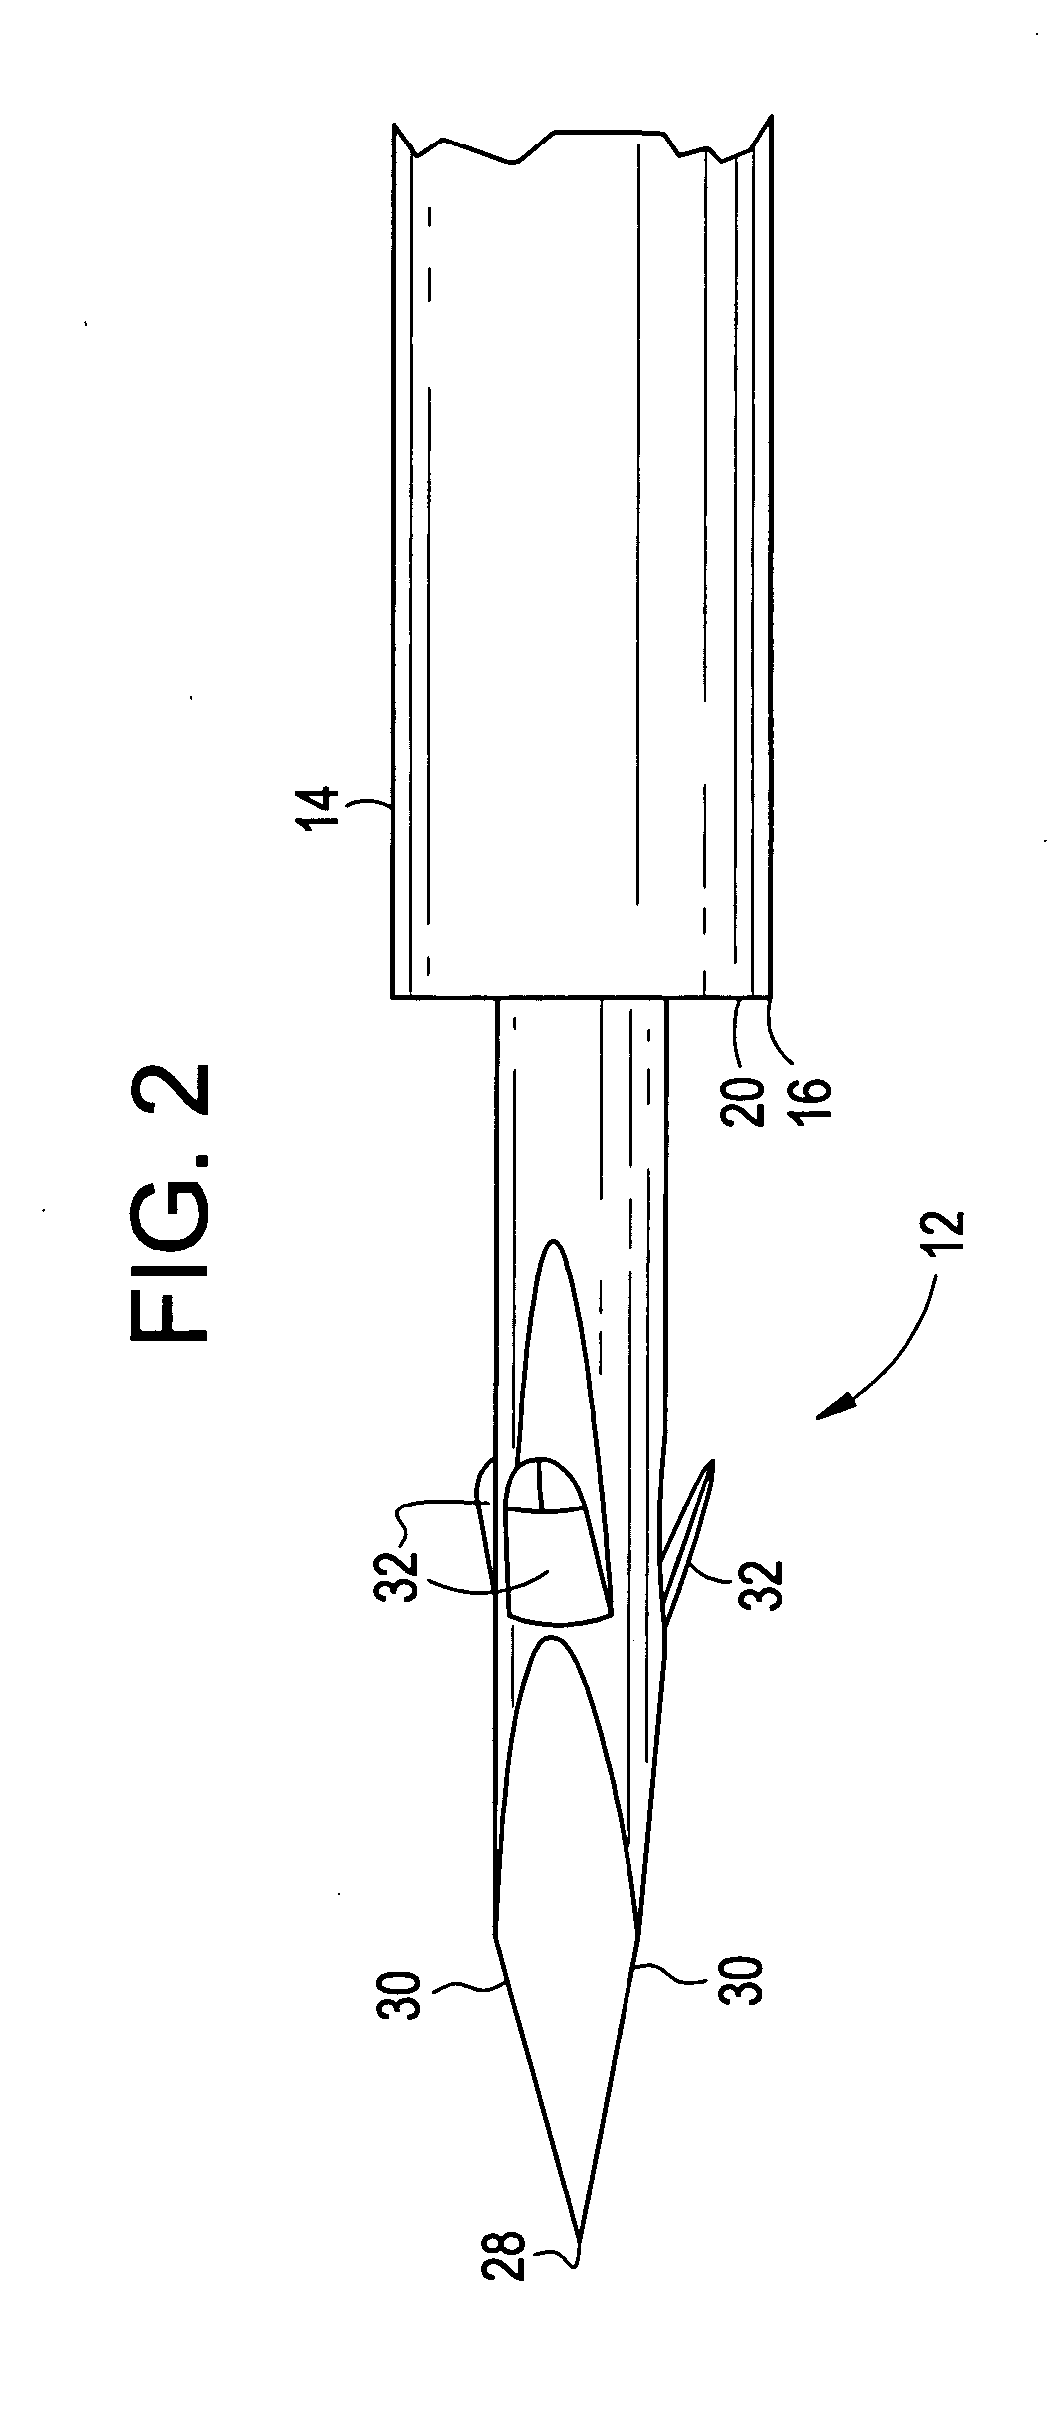 Tissue punch and method for creating an anastomosis for locating a bypass graft